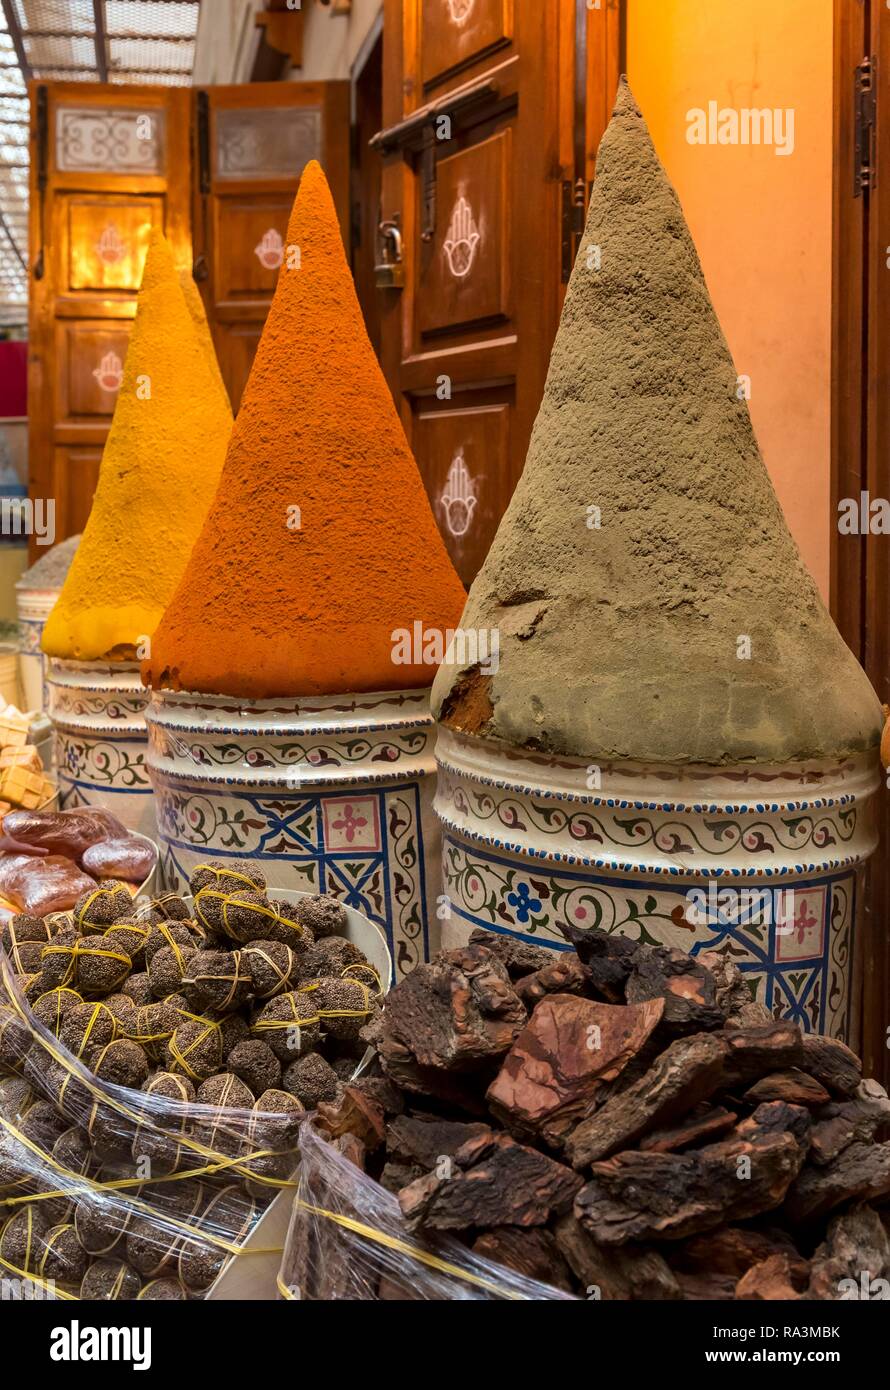 Spices and herbs on sale in Marrakech market, Marrakech, Morocco Stock Photo